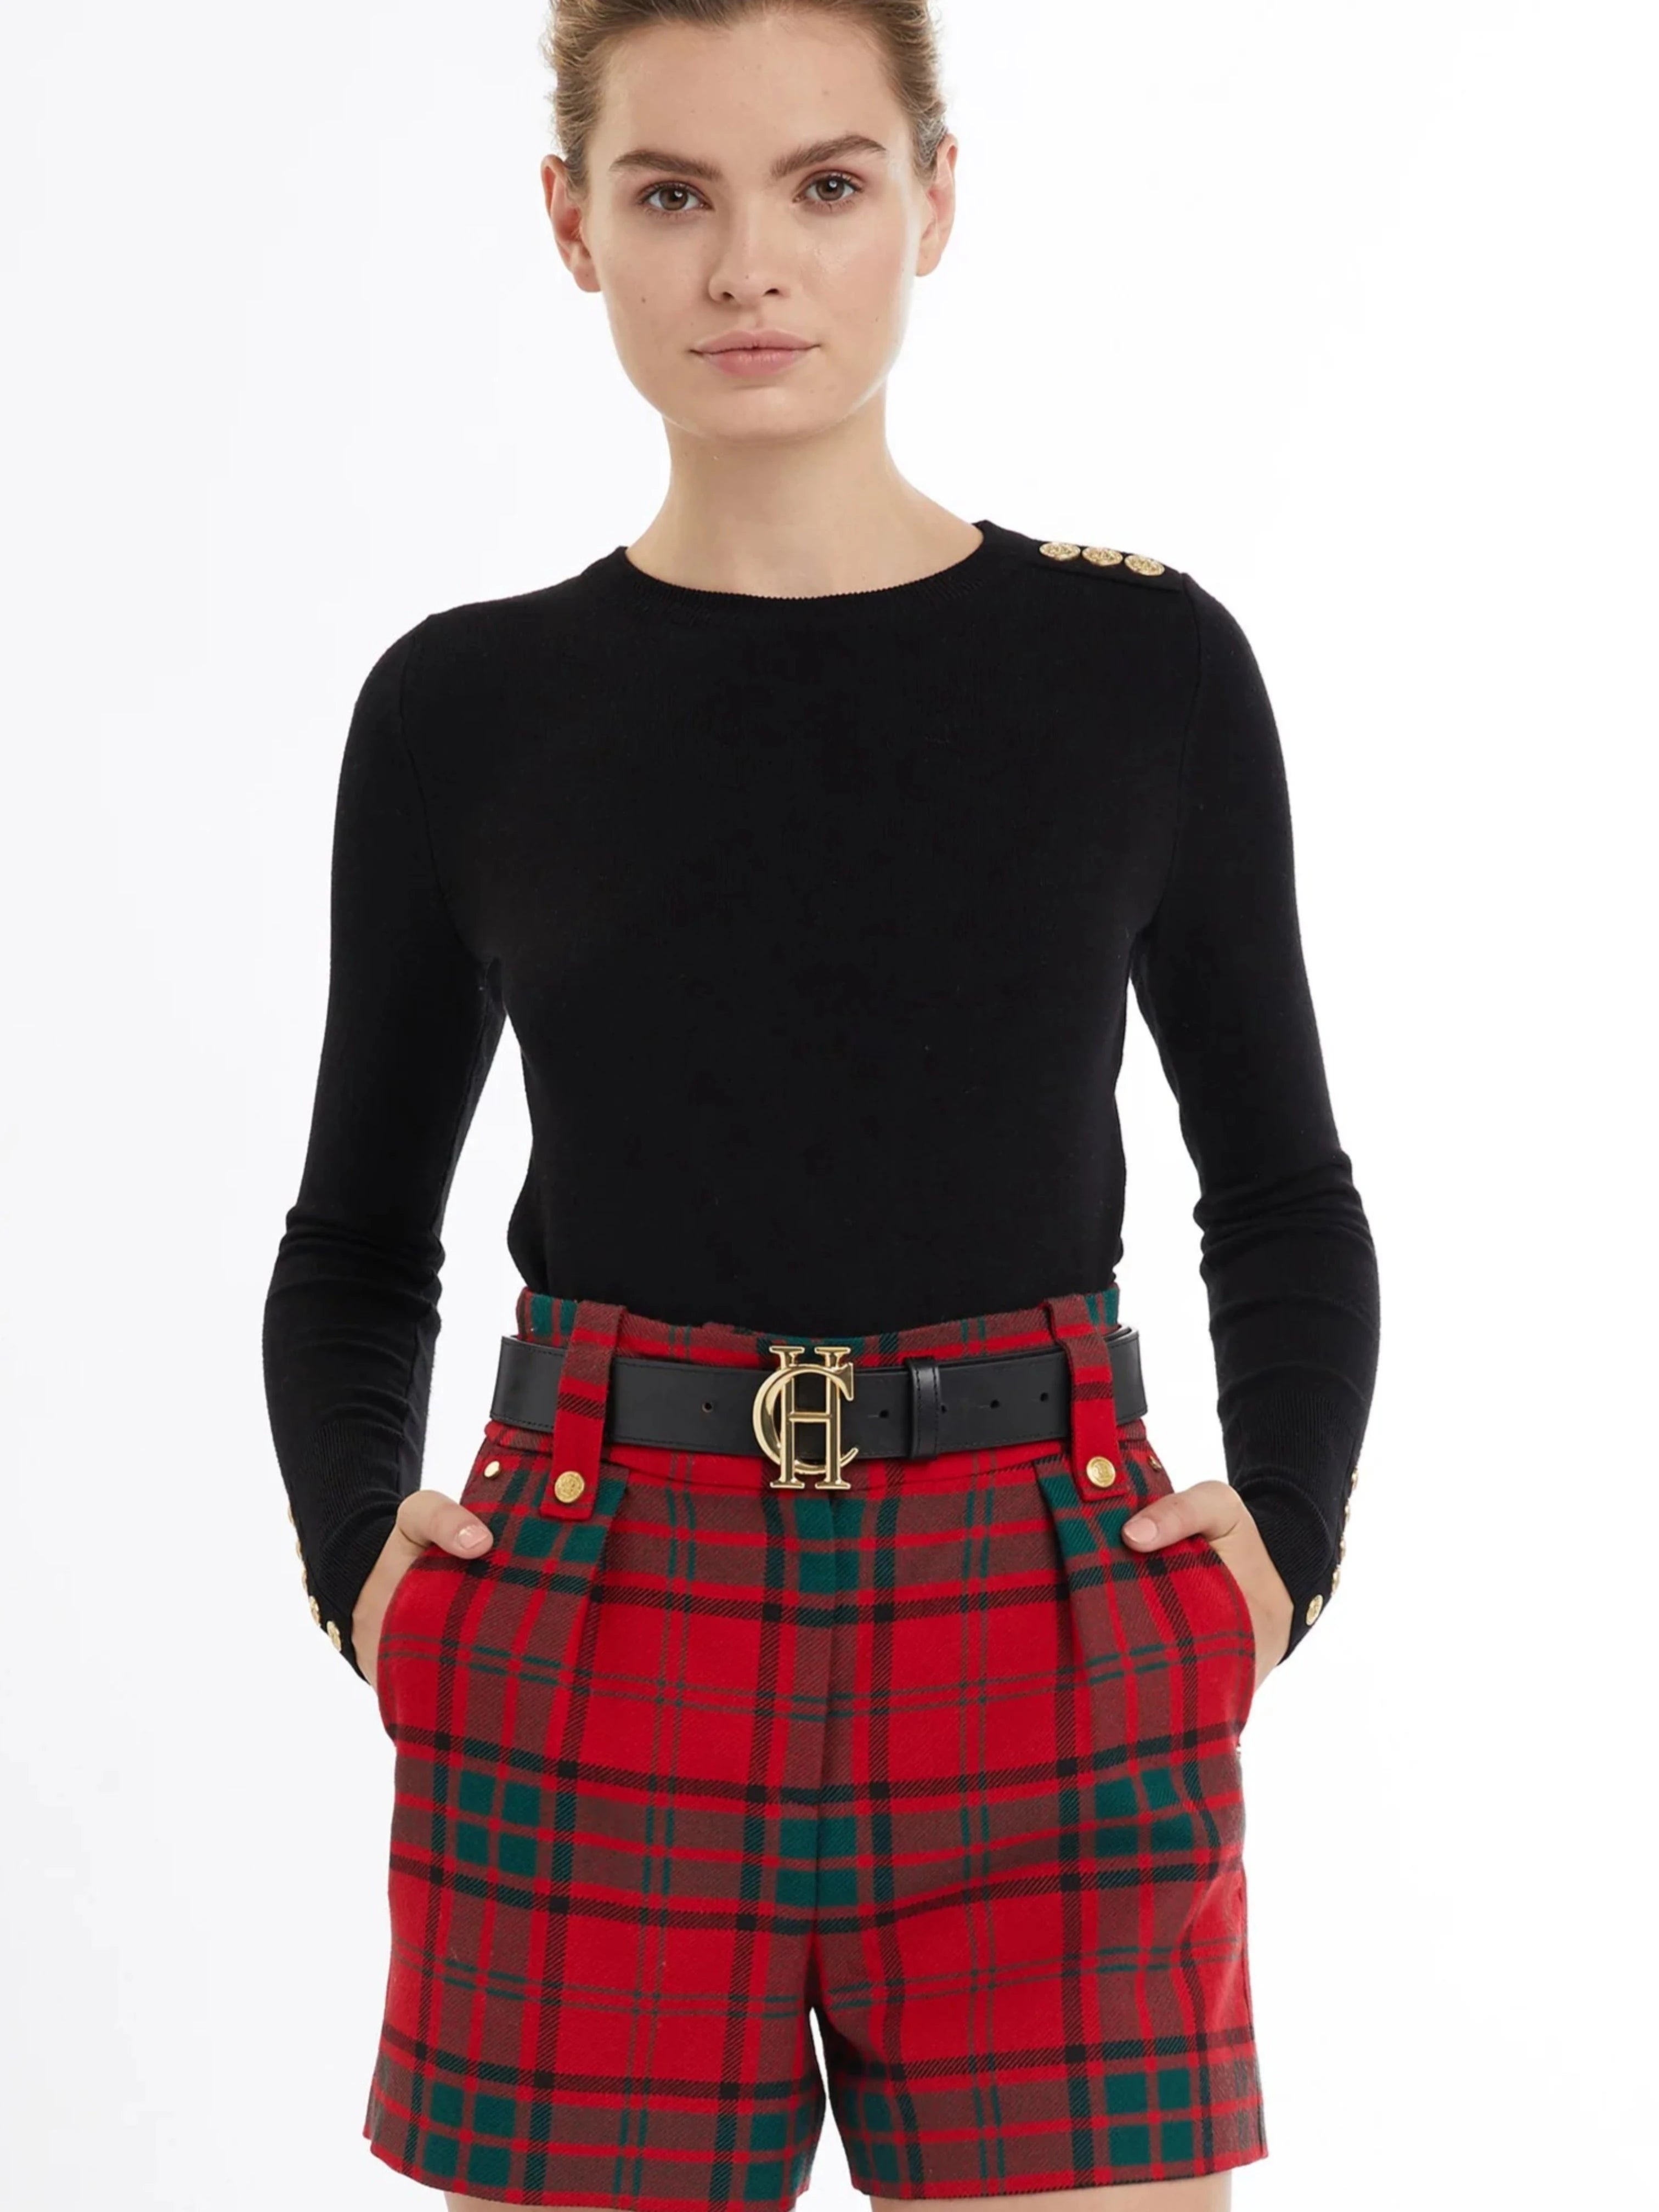 Holland Cooper Luxe Tailored Short in Red Tartan